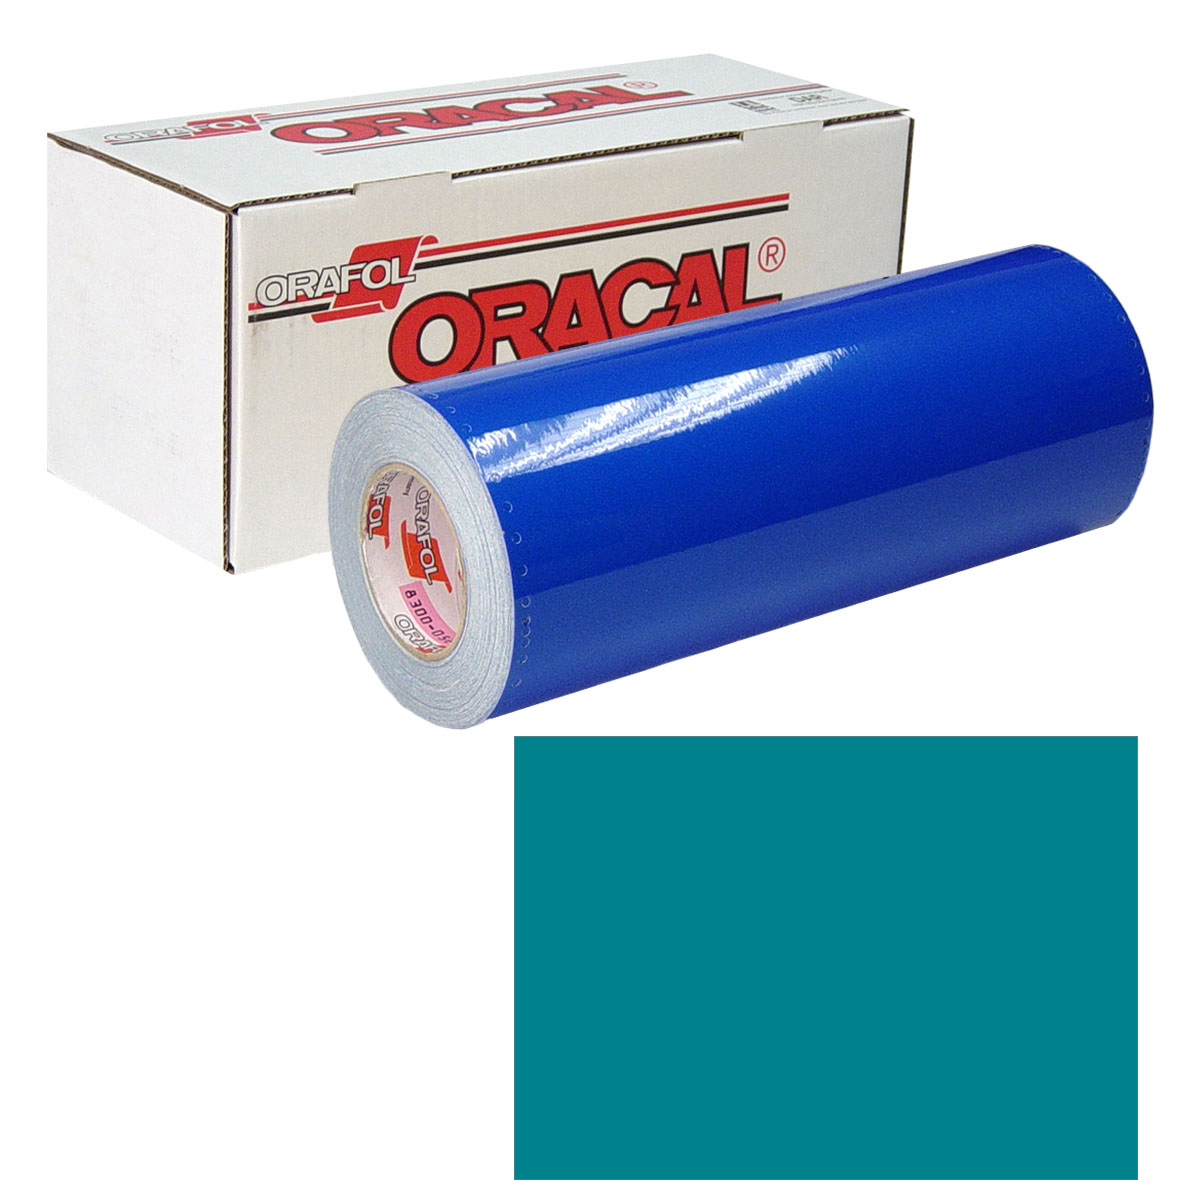 ORACAL 631 Unp 48in X 50yd 066 Turquoise Blue